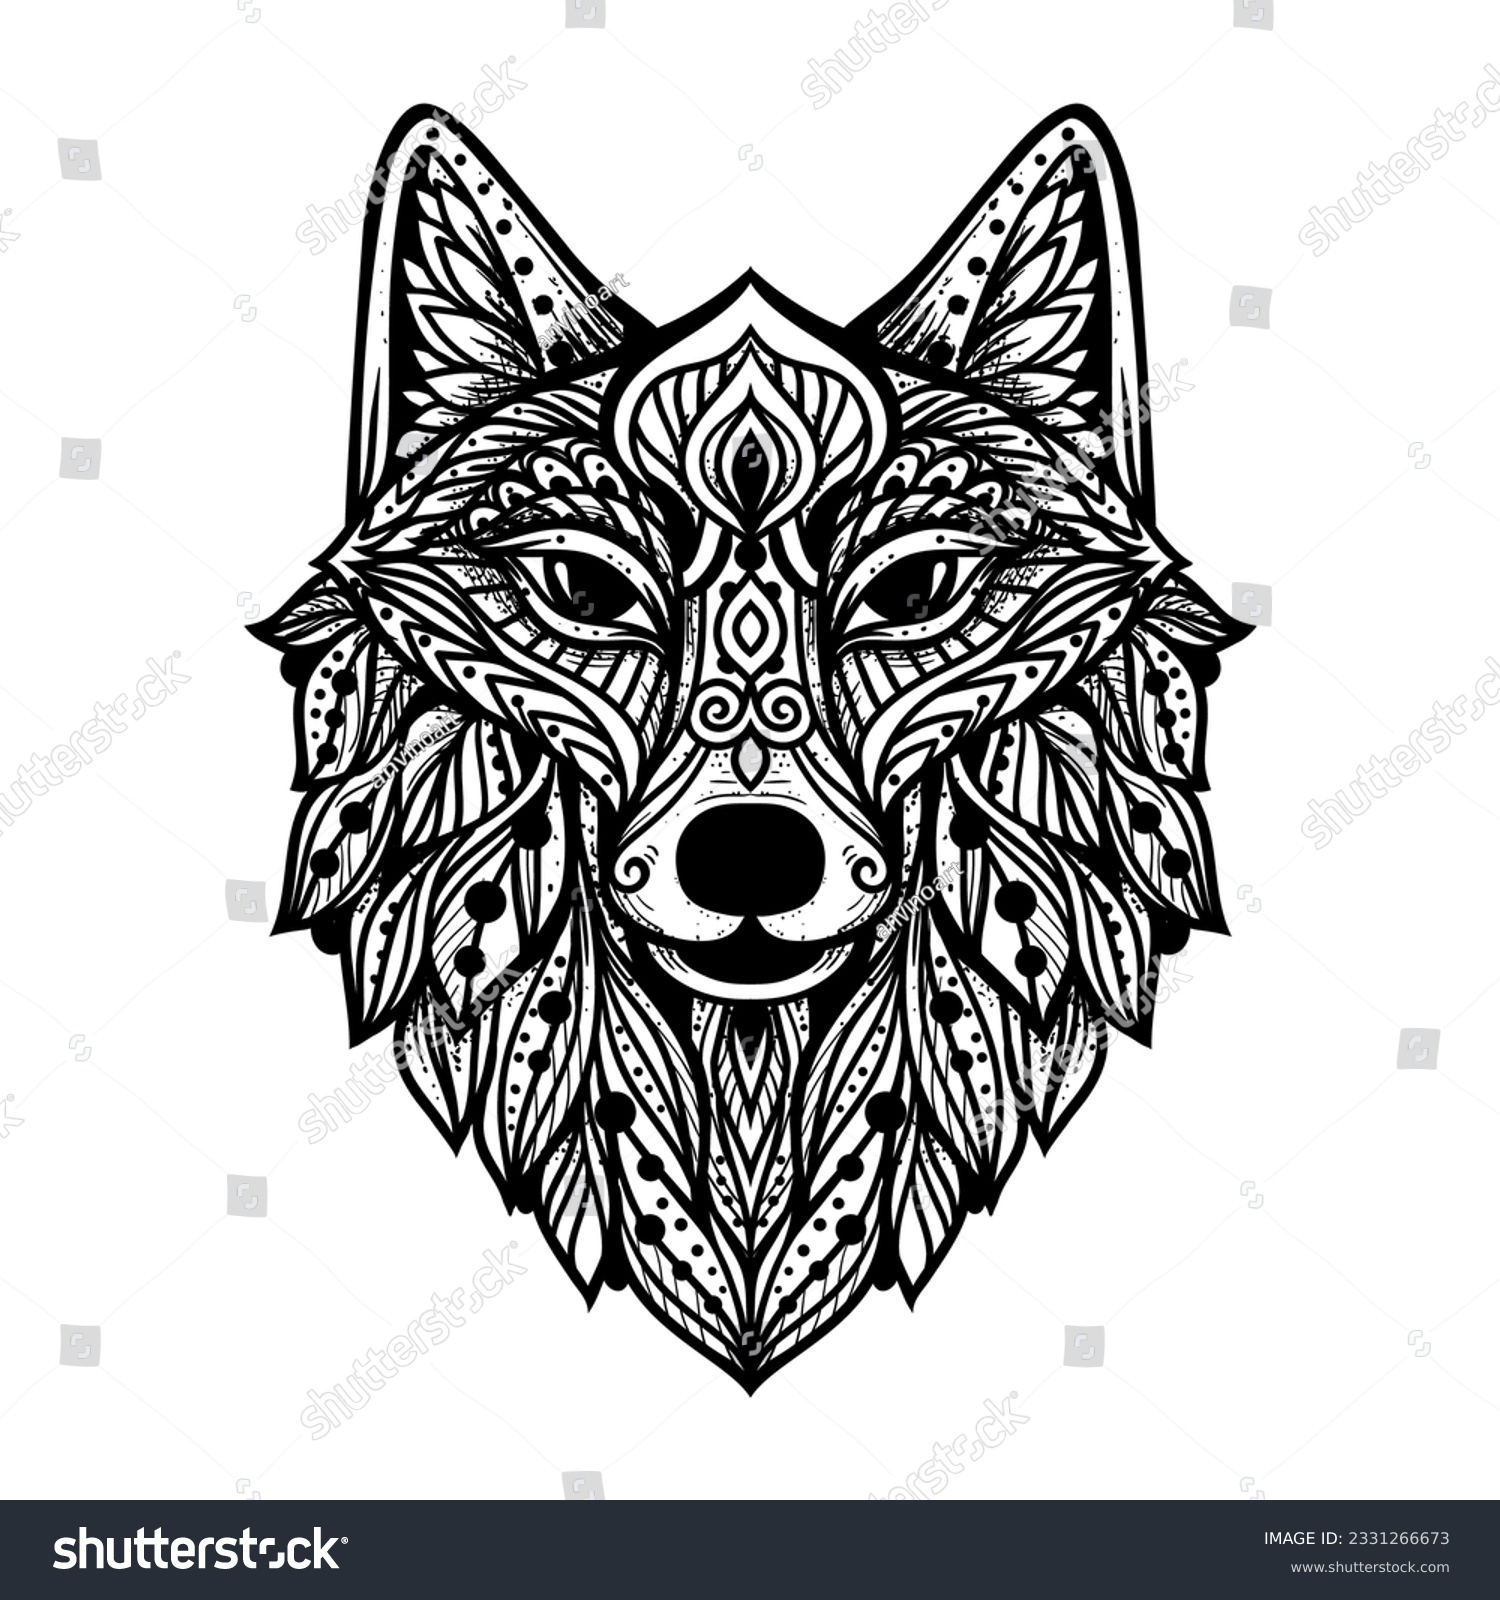 SVG of Wolf mandala. Vector illustration. Adult coloring page. Spiritual Animal in Zen boho style. Sacred, Peaceful. Tattoo tribal print. Black and white svg